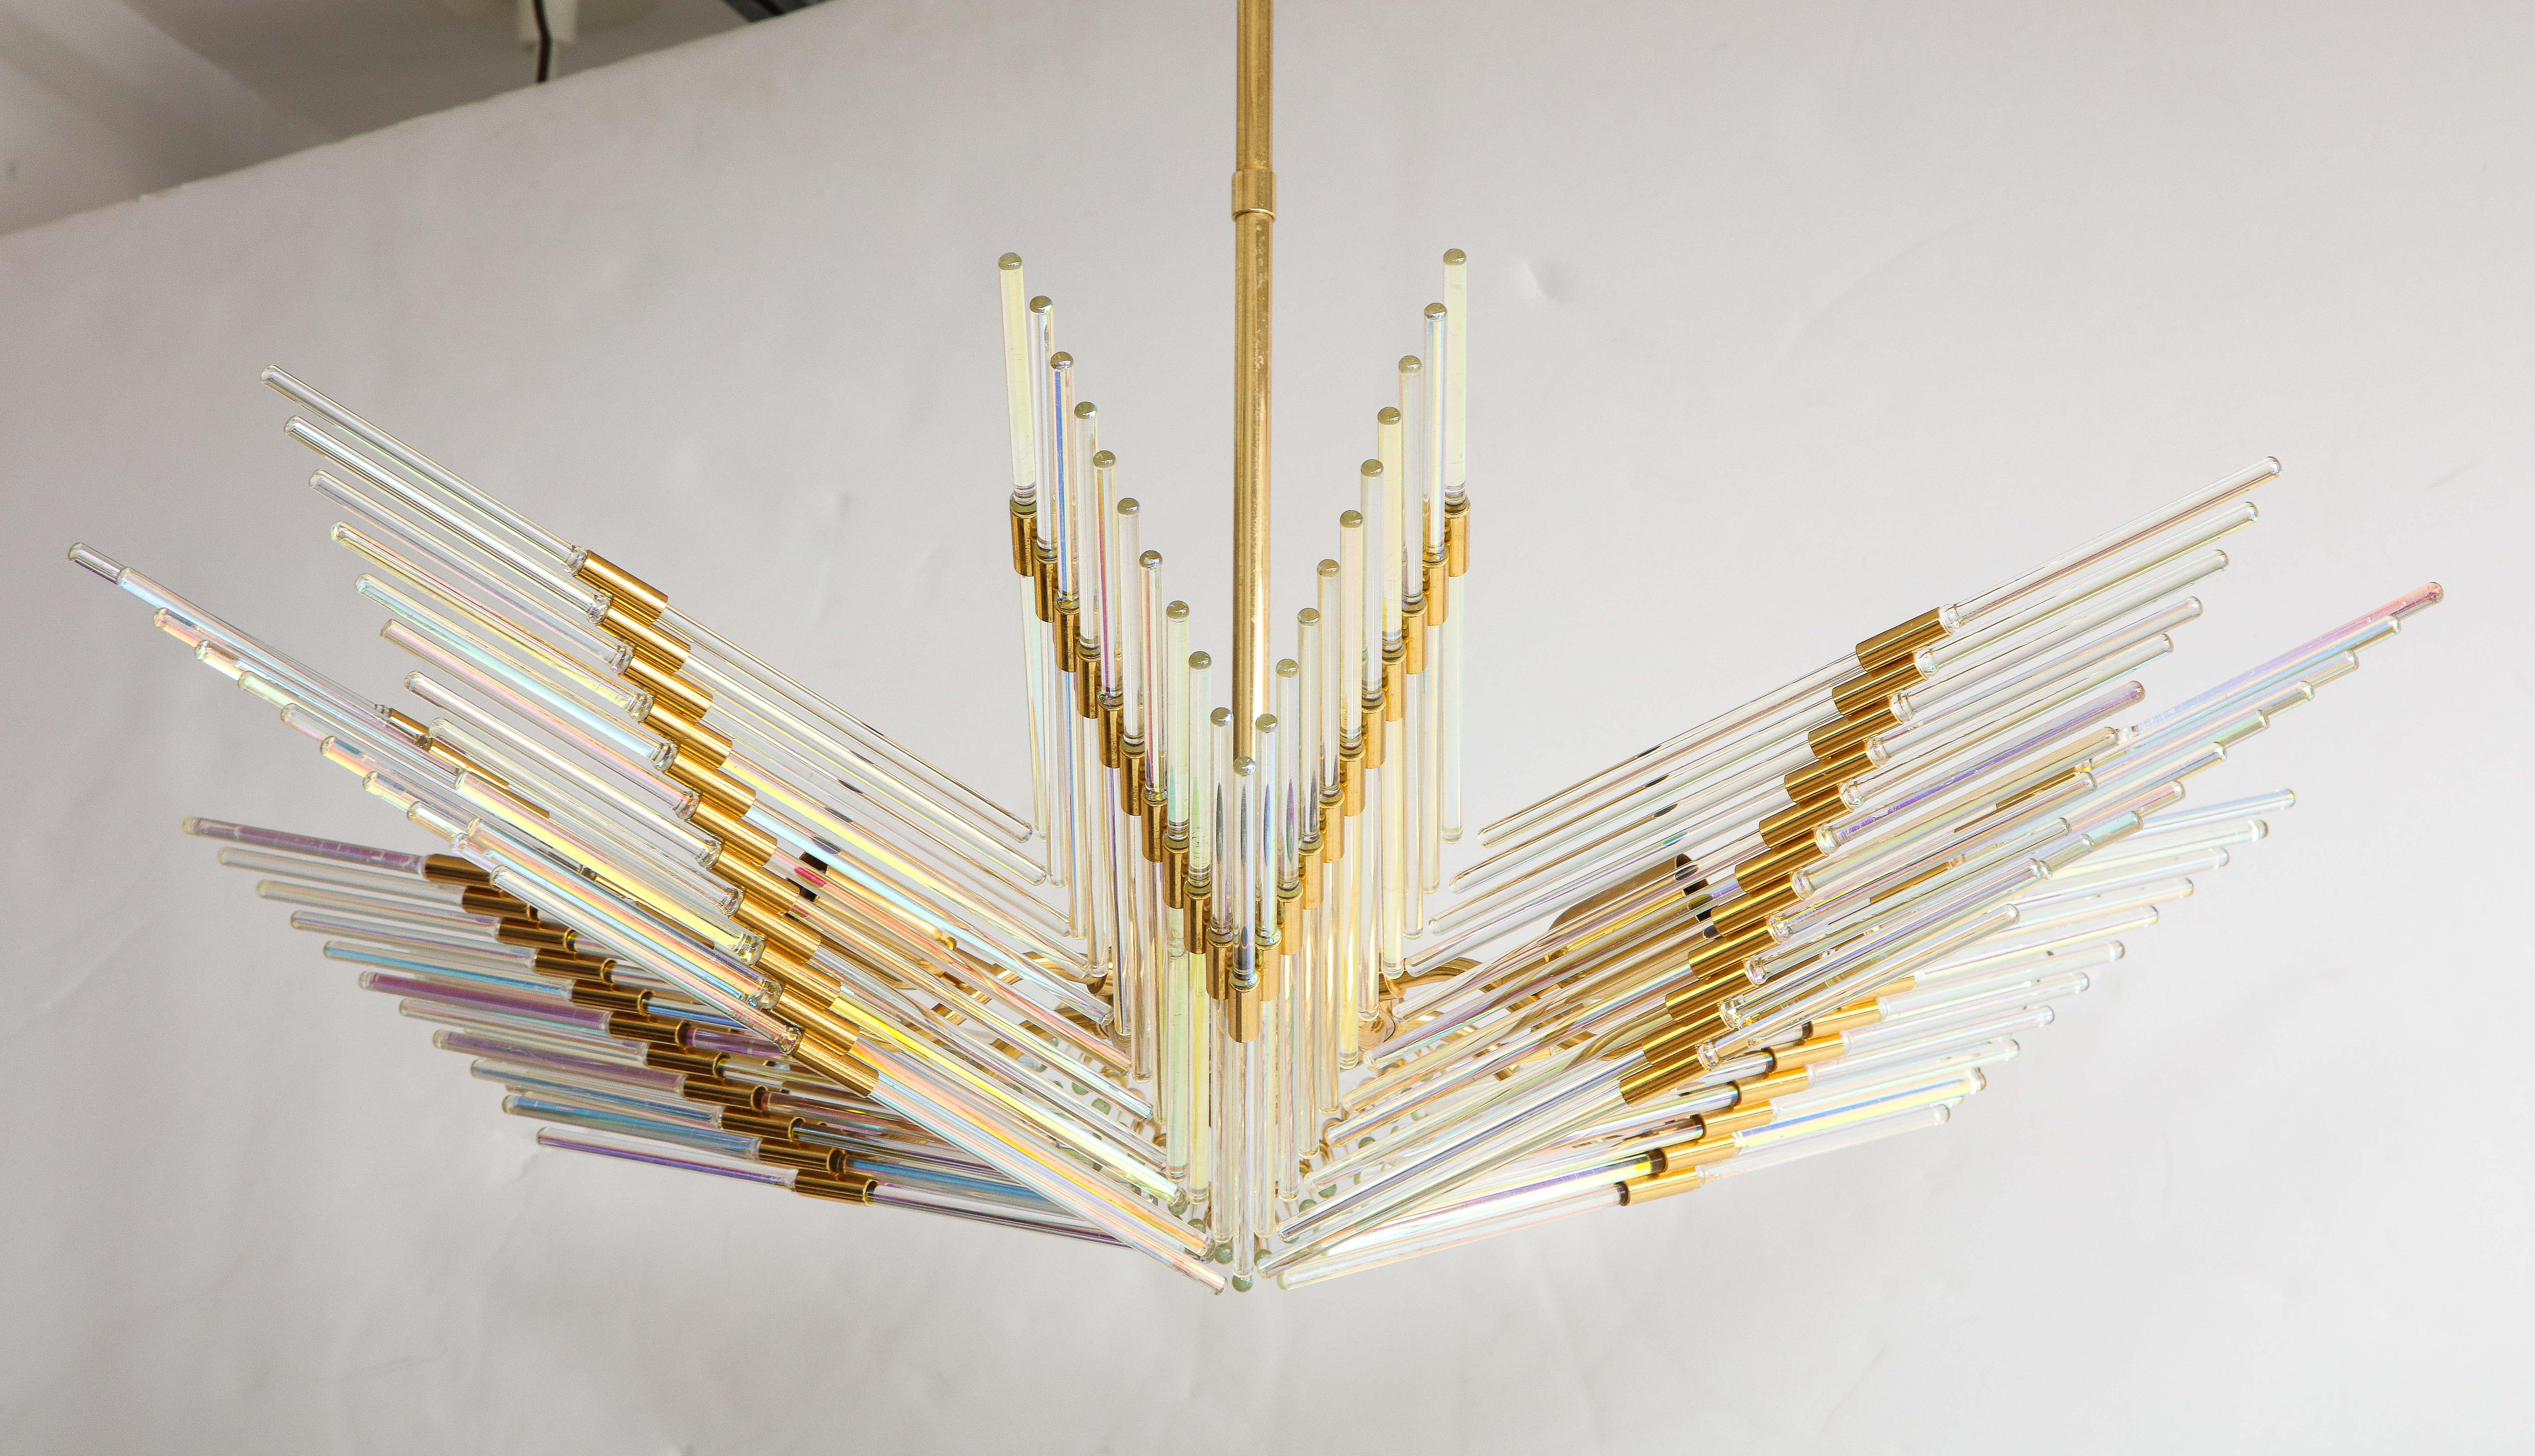 A Gaetano Sciolari iridescent and gold plated chandelier. The 'wings' of the chandelier emanate from a central gold plated stem, with iridescent glass rods inserted into individual gold plated rings. A very unique piece, which would make for a